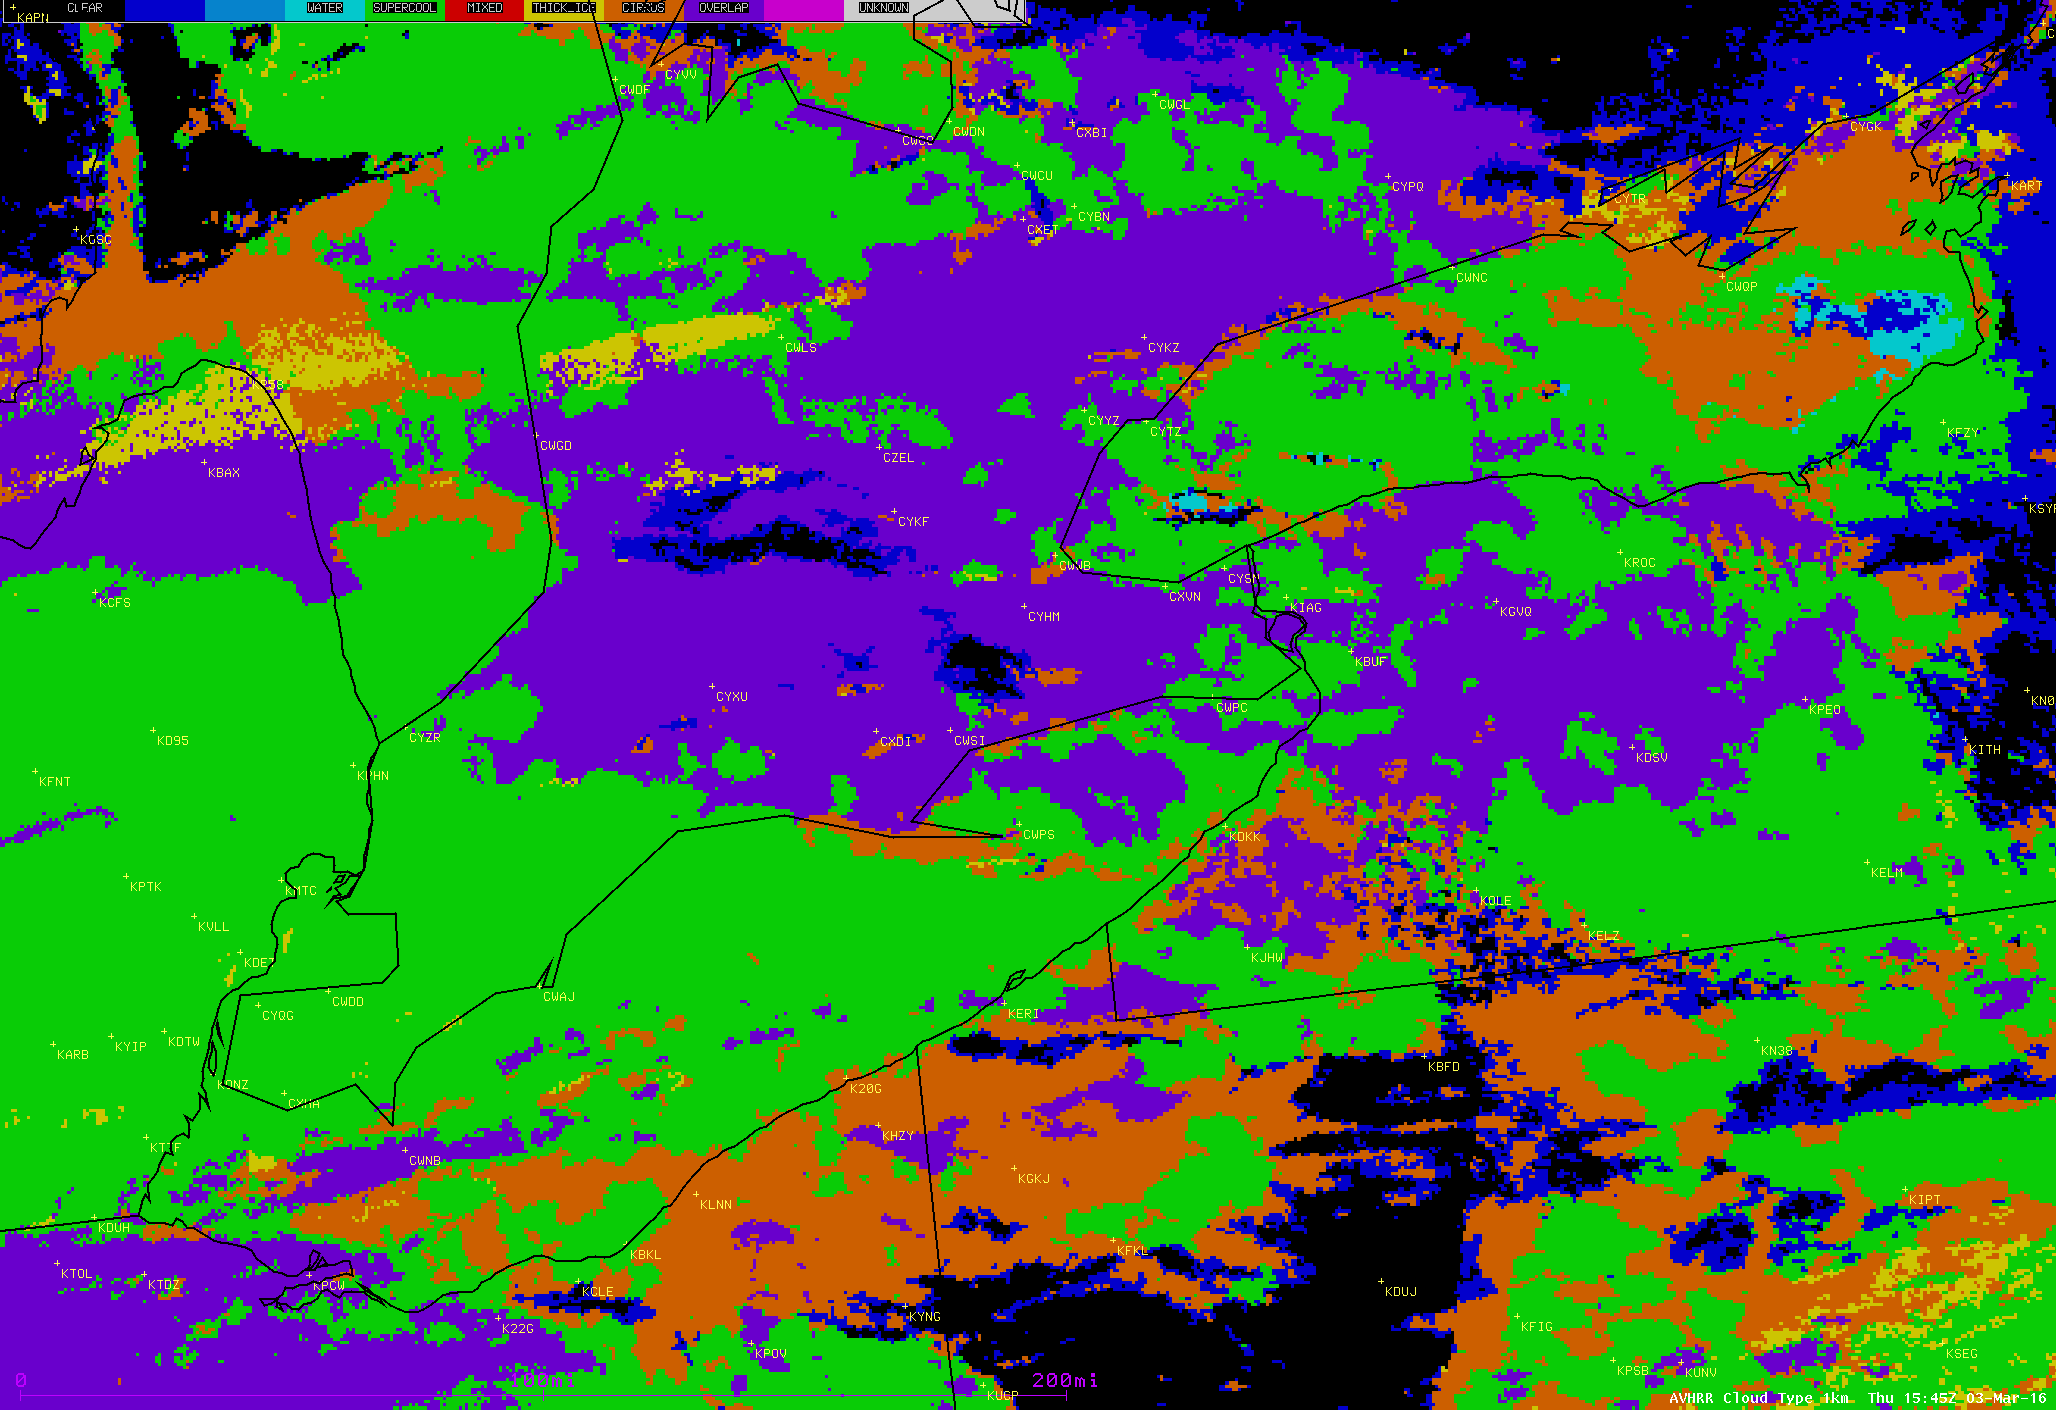 POES AVHRR Cloud Type product at 1545 UTC [click to enlarge]